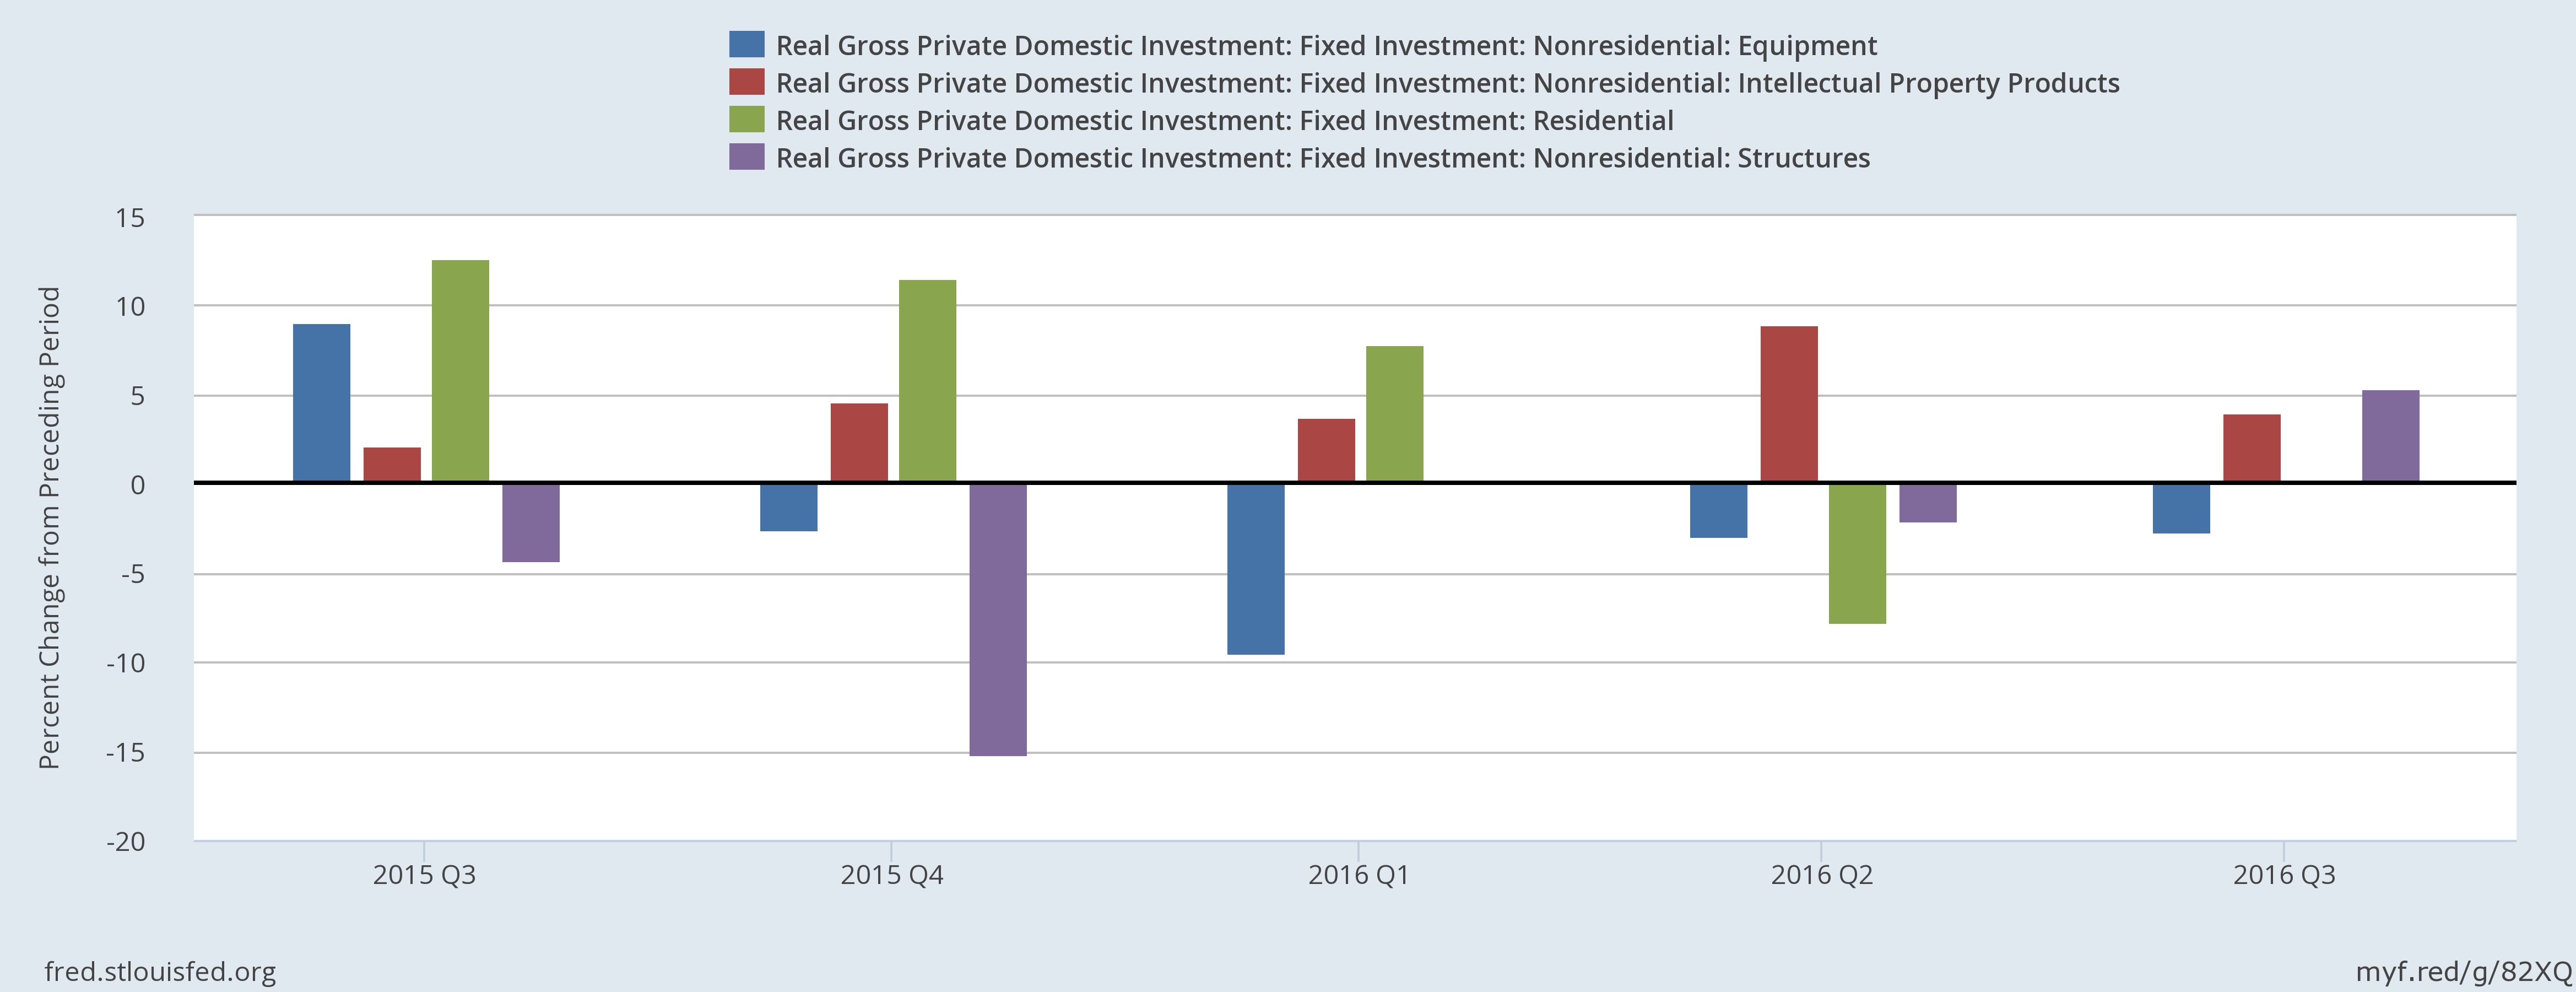 Real Gross Private Domestic Investment